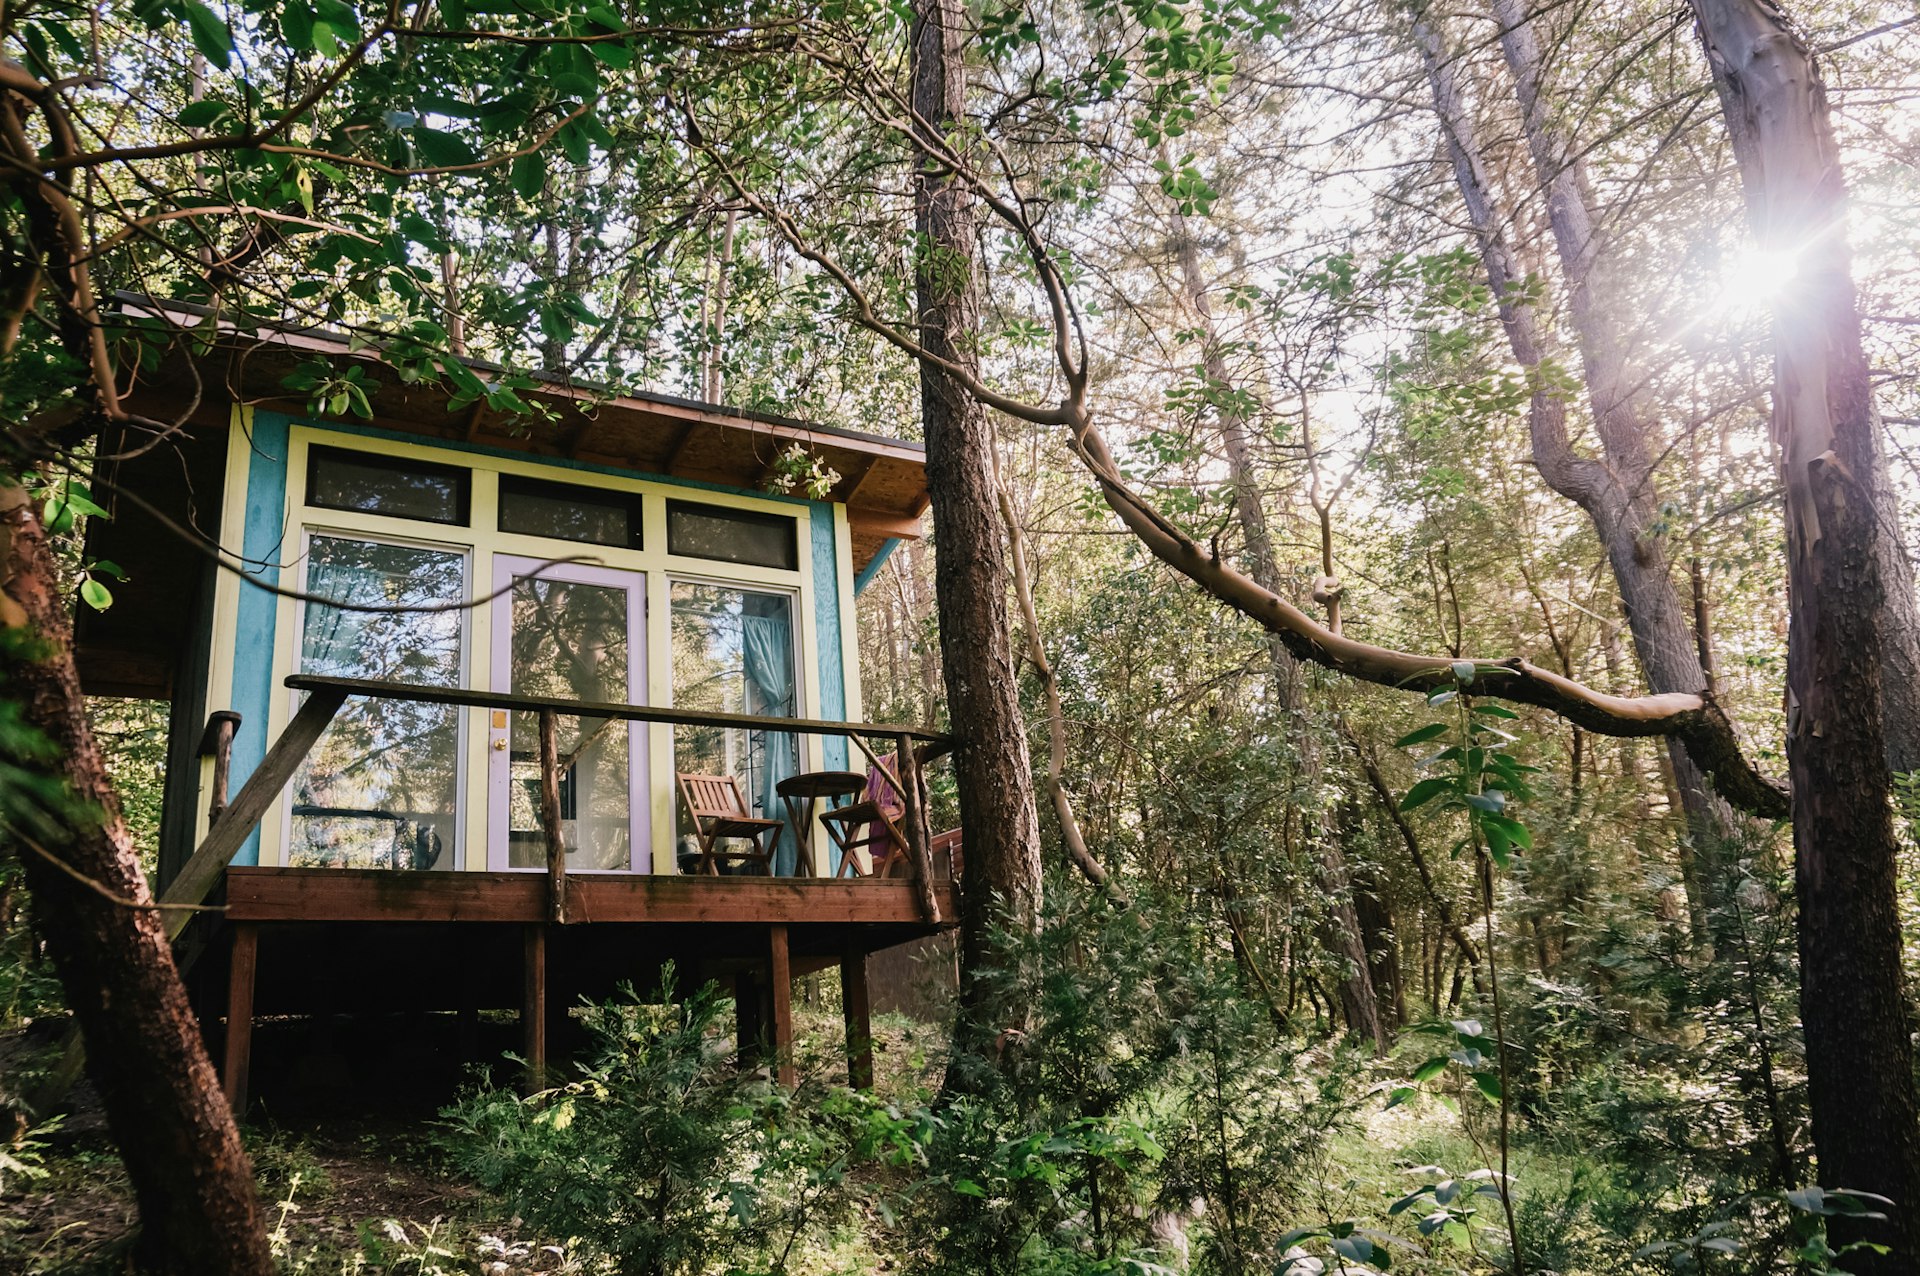 A glass-front cabin nestled in the trees